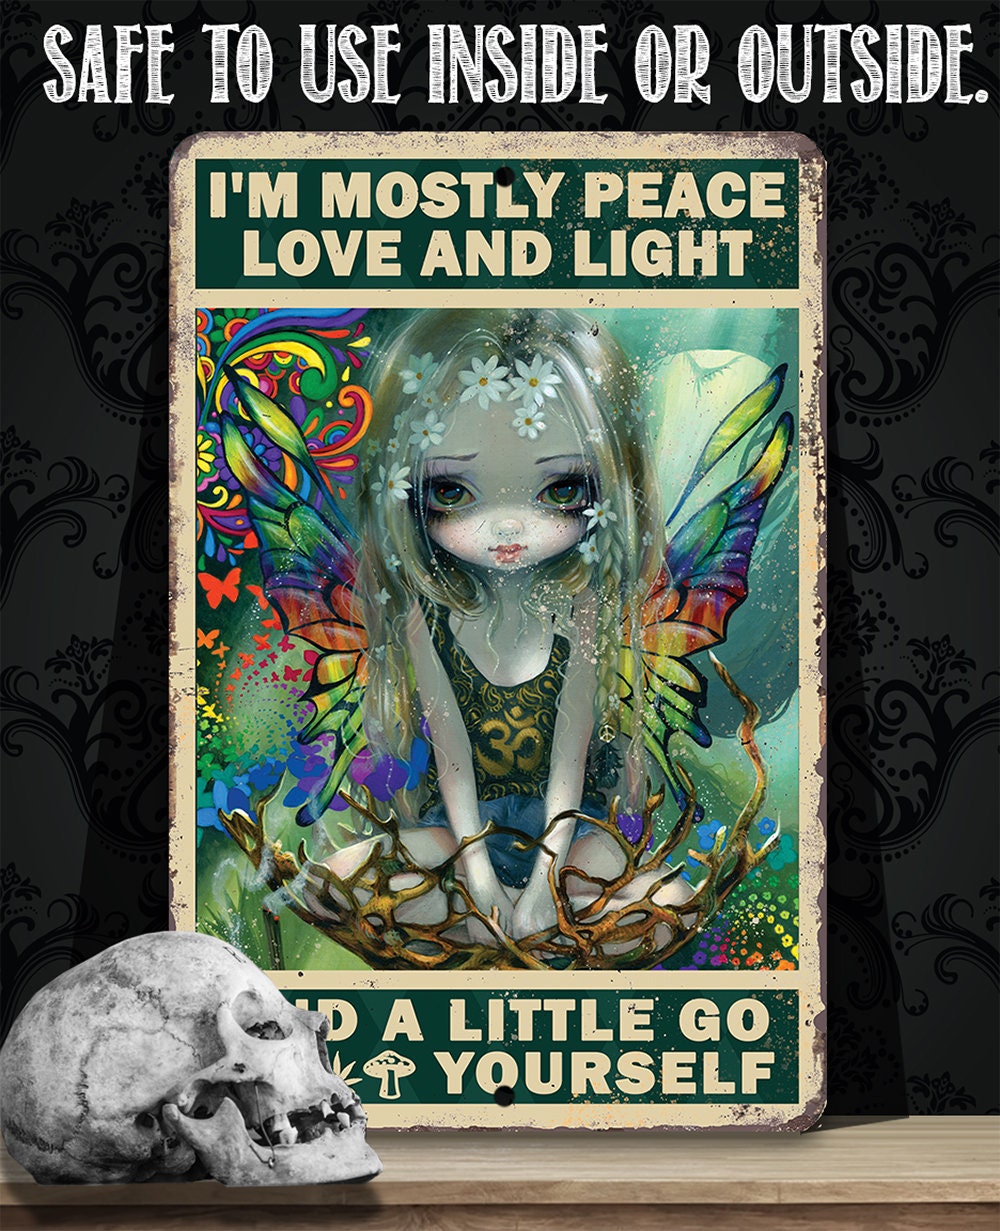 I'm Mostly Peace Love and Light - Metal Sign Metal Sign Lone Star Art 